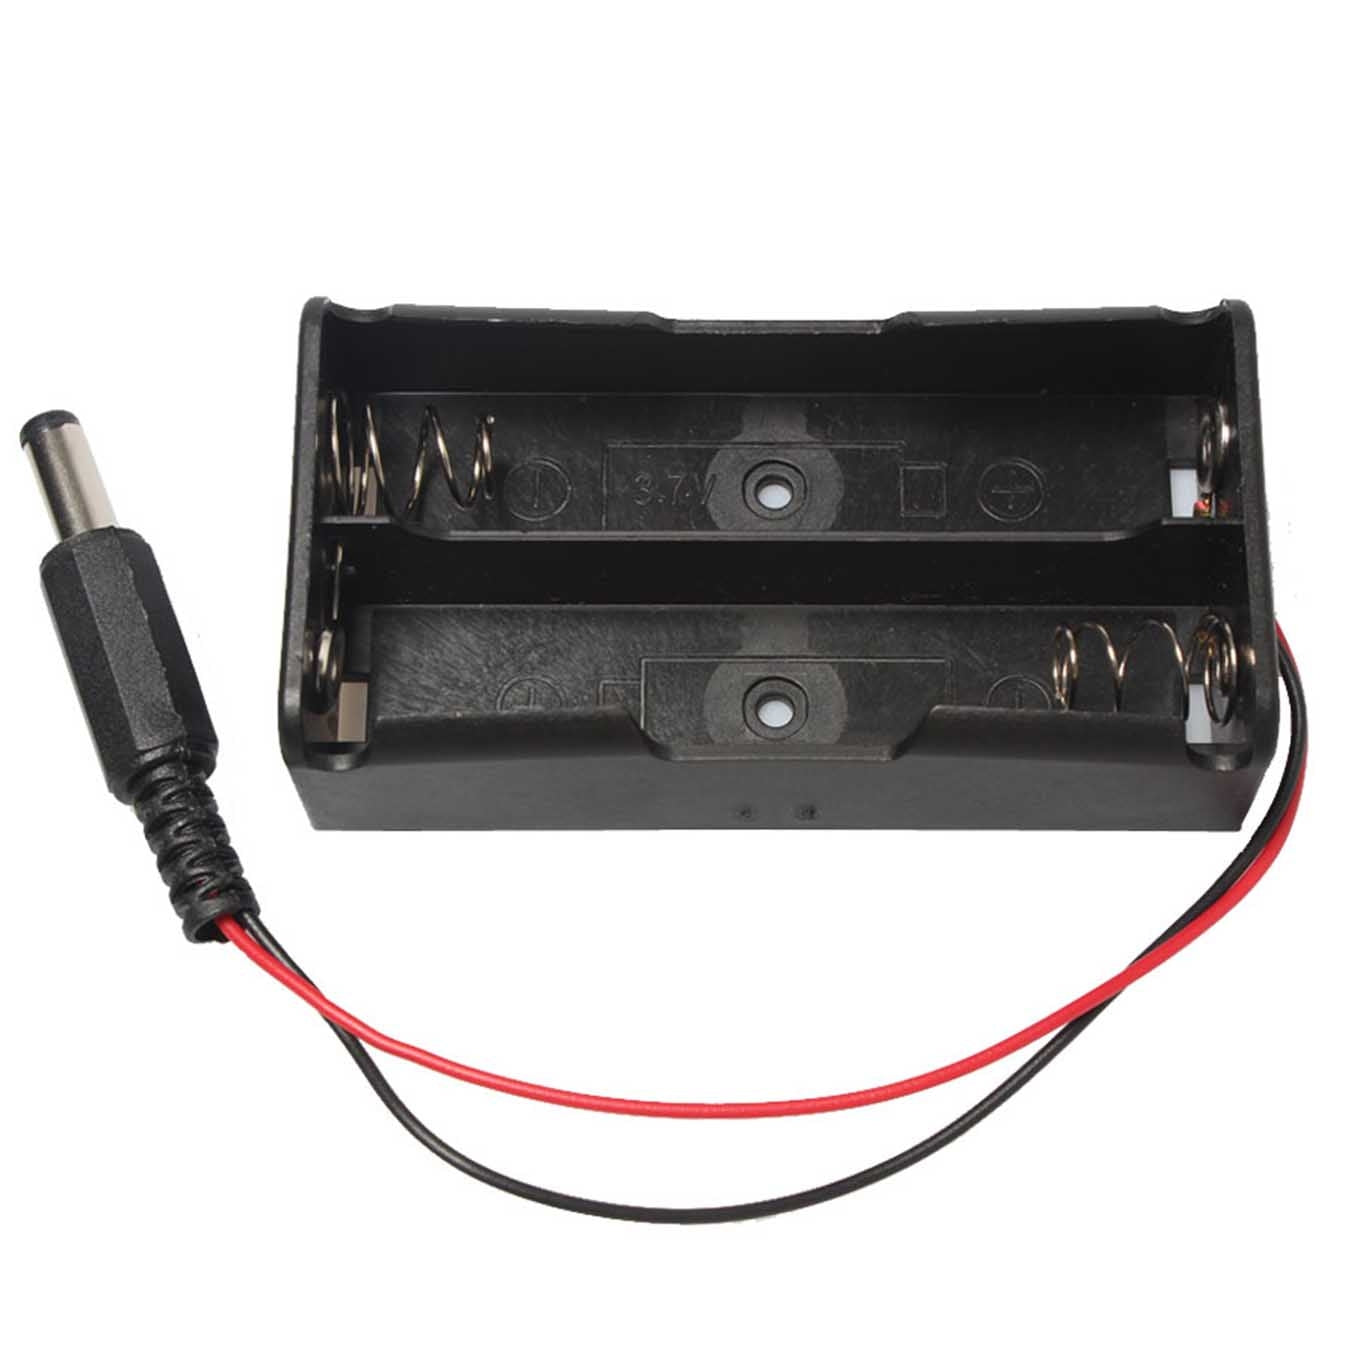 Battery Holder 18650 Dual Slot with DC Plug